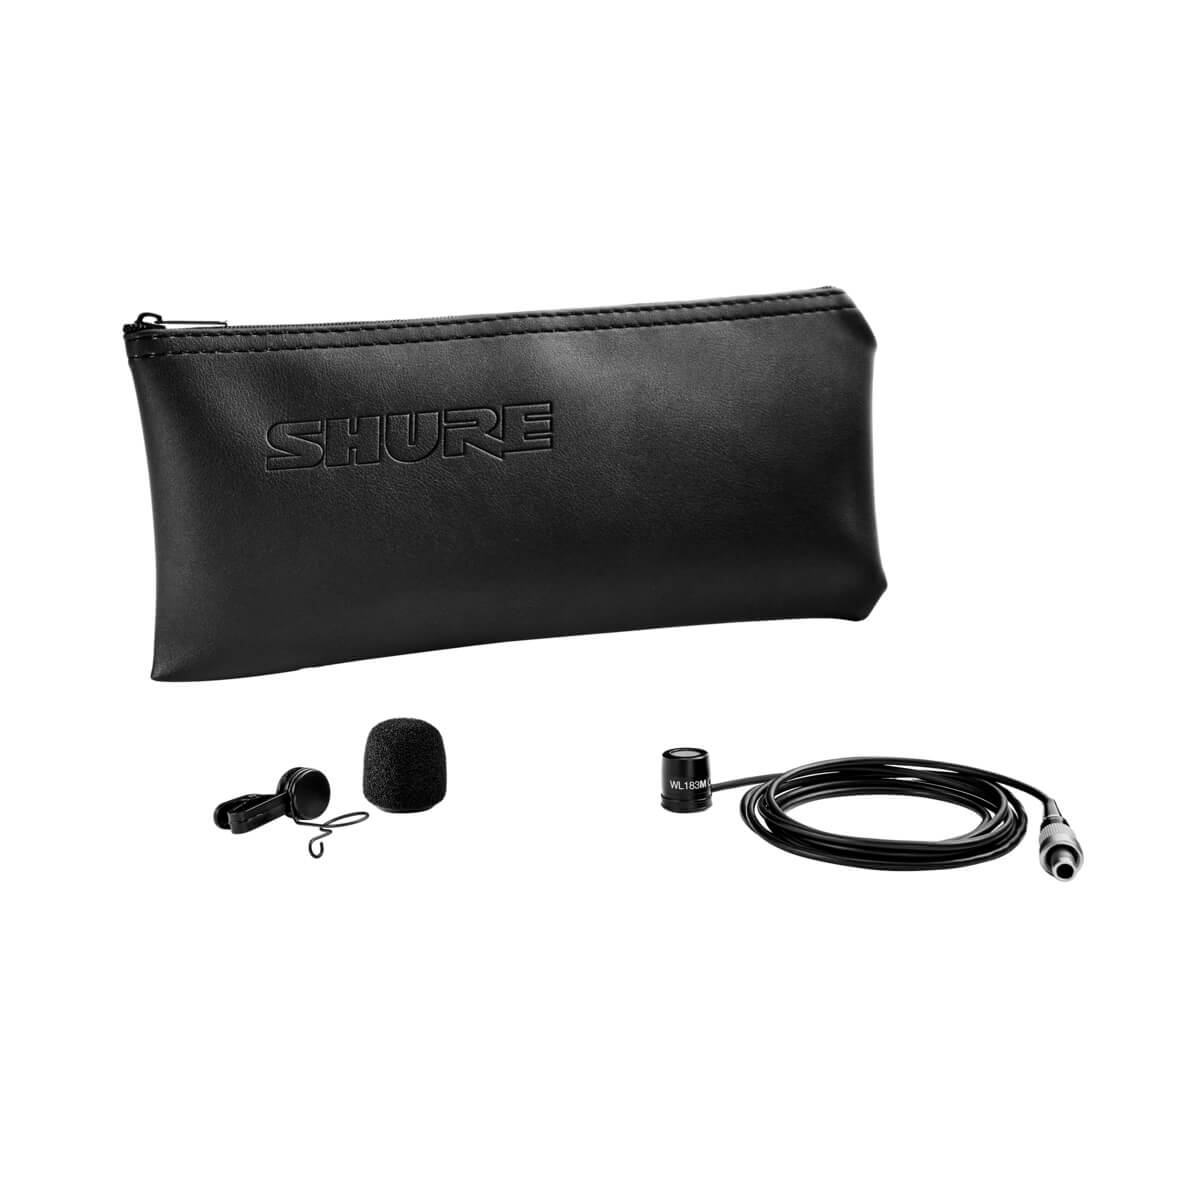 Shure WL183M - Microflex Low-profile Omnidirectional Lavalier Microphone, black with bag